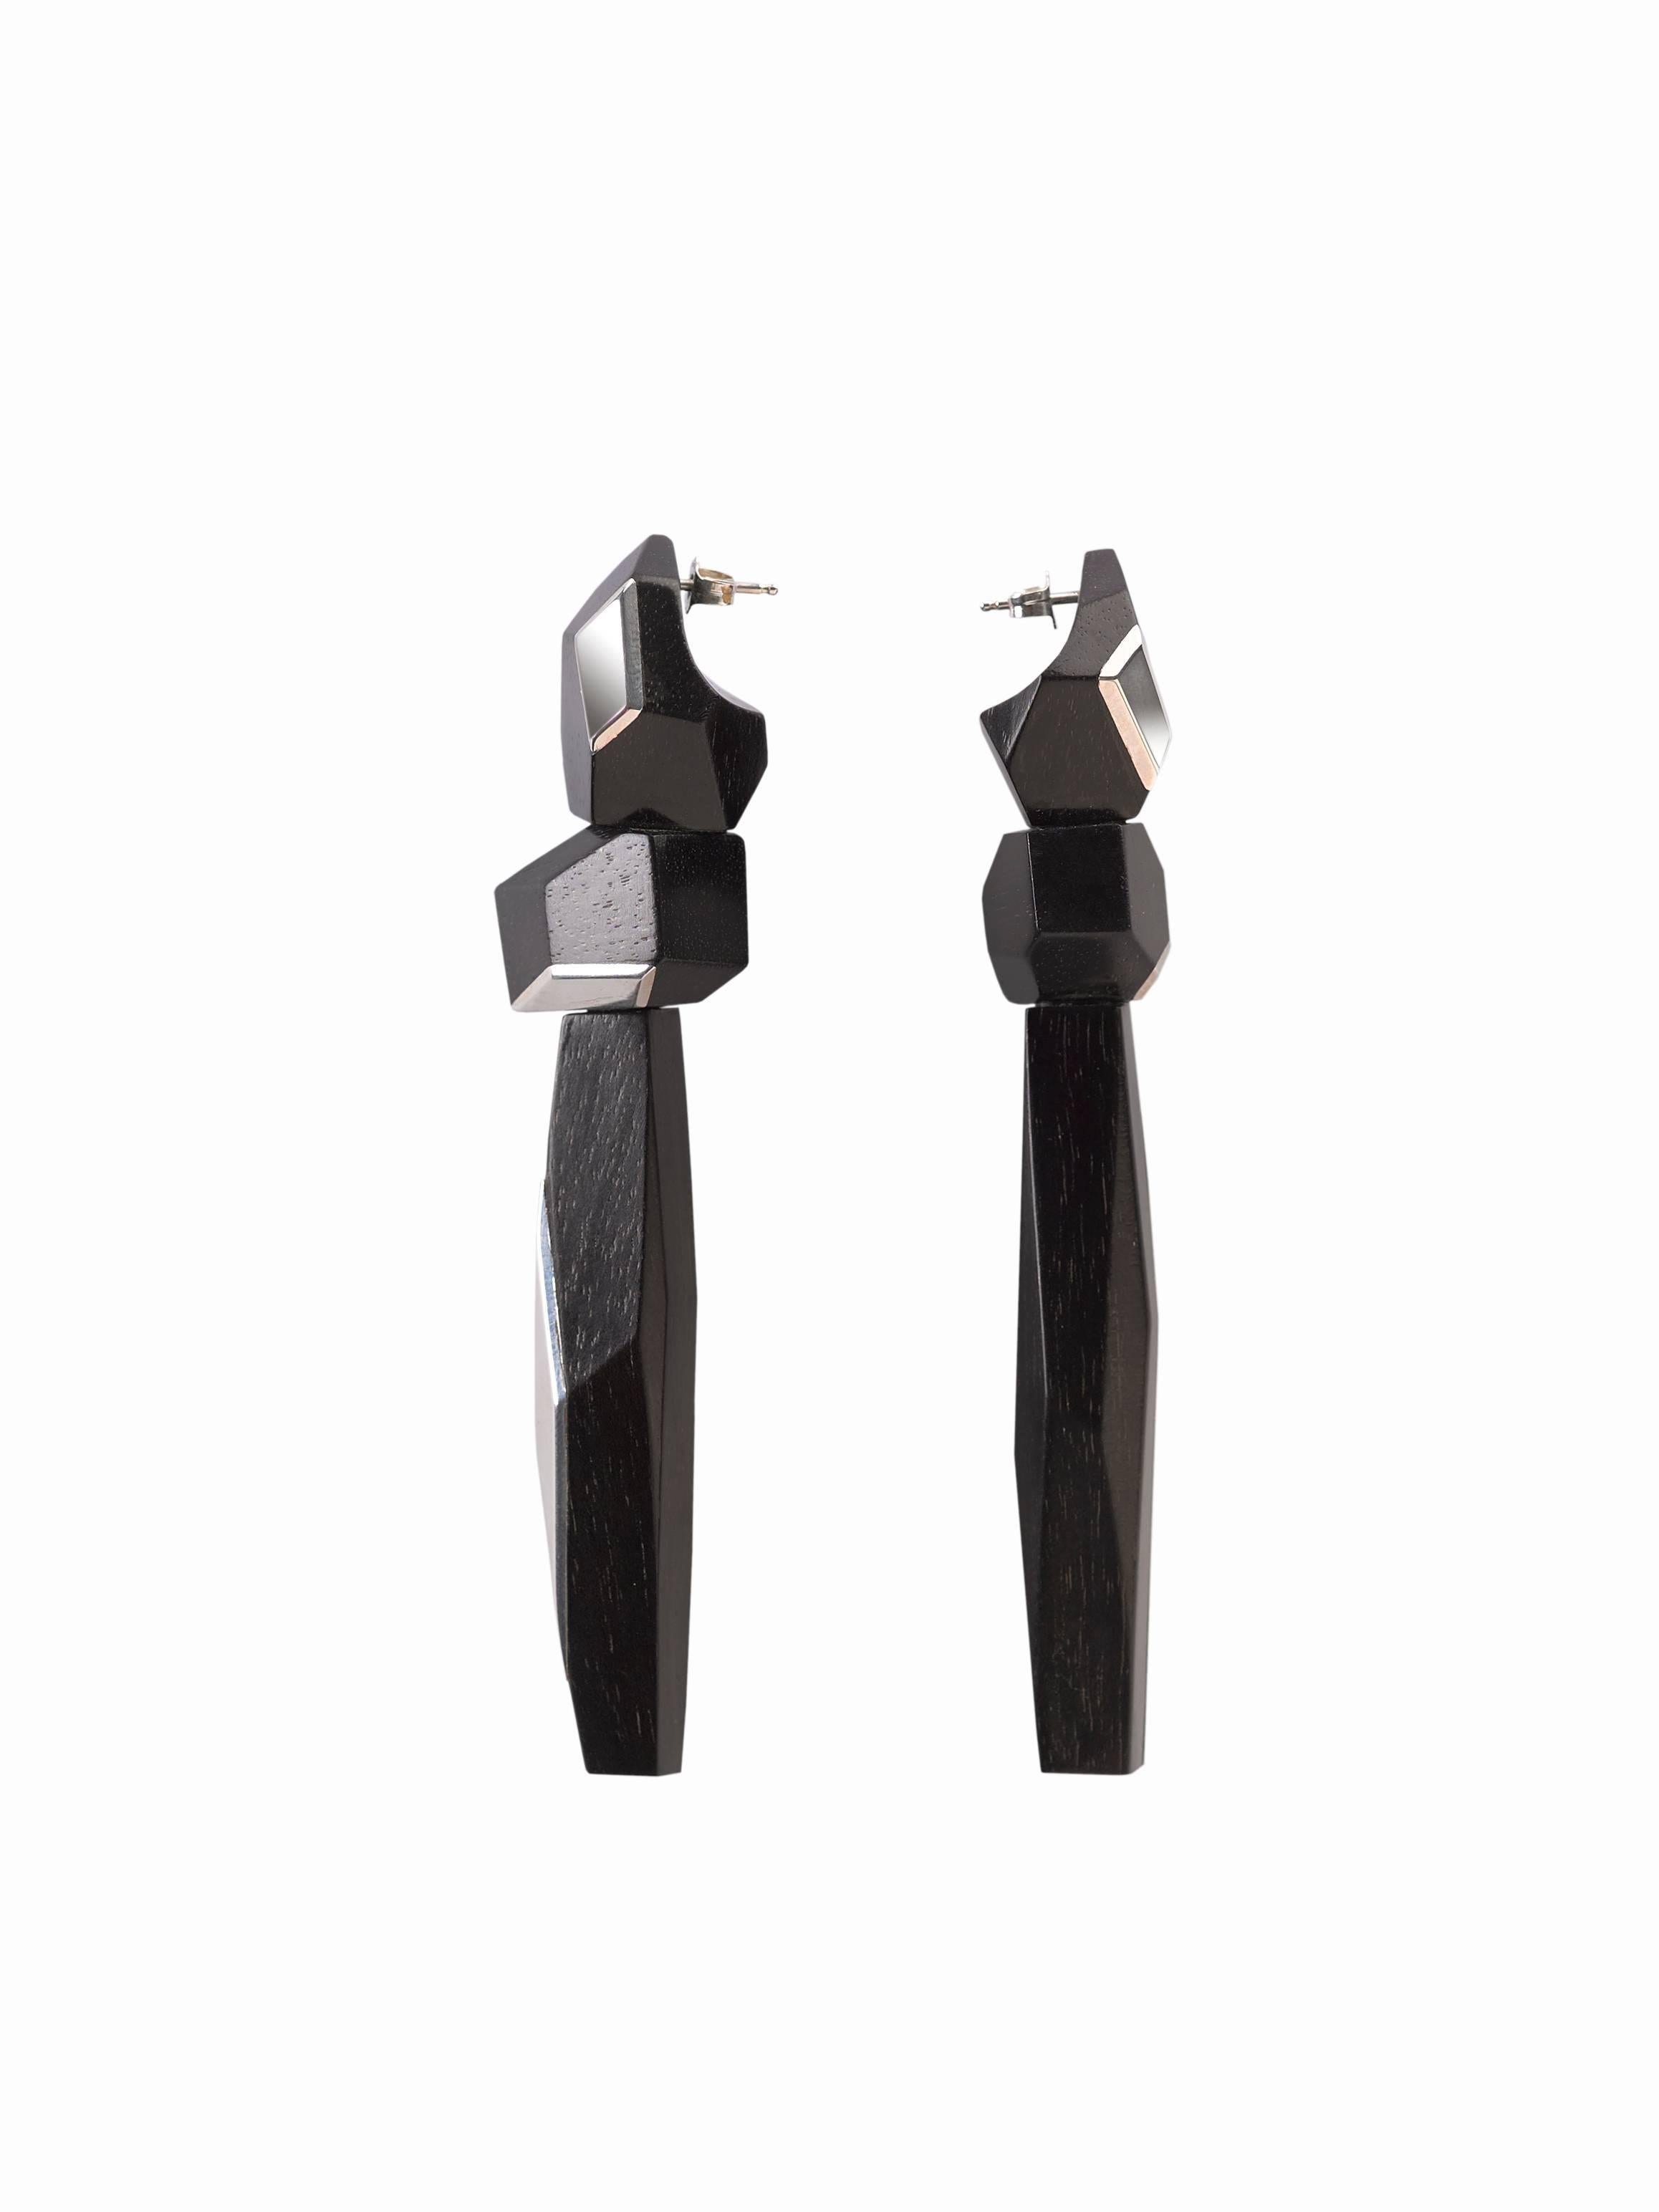 These pair of long dangling MATAR asymmetrical hand-carved ebony earrings celebrate the intricate craftsmanship of the past.  The jet black textured ebony is a perfect compliment to the high shine delicate sterling Rose gold inlays.
These weightless